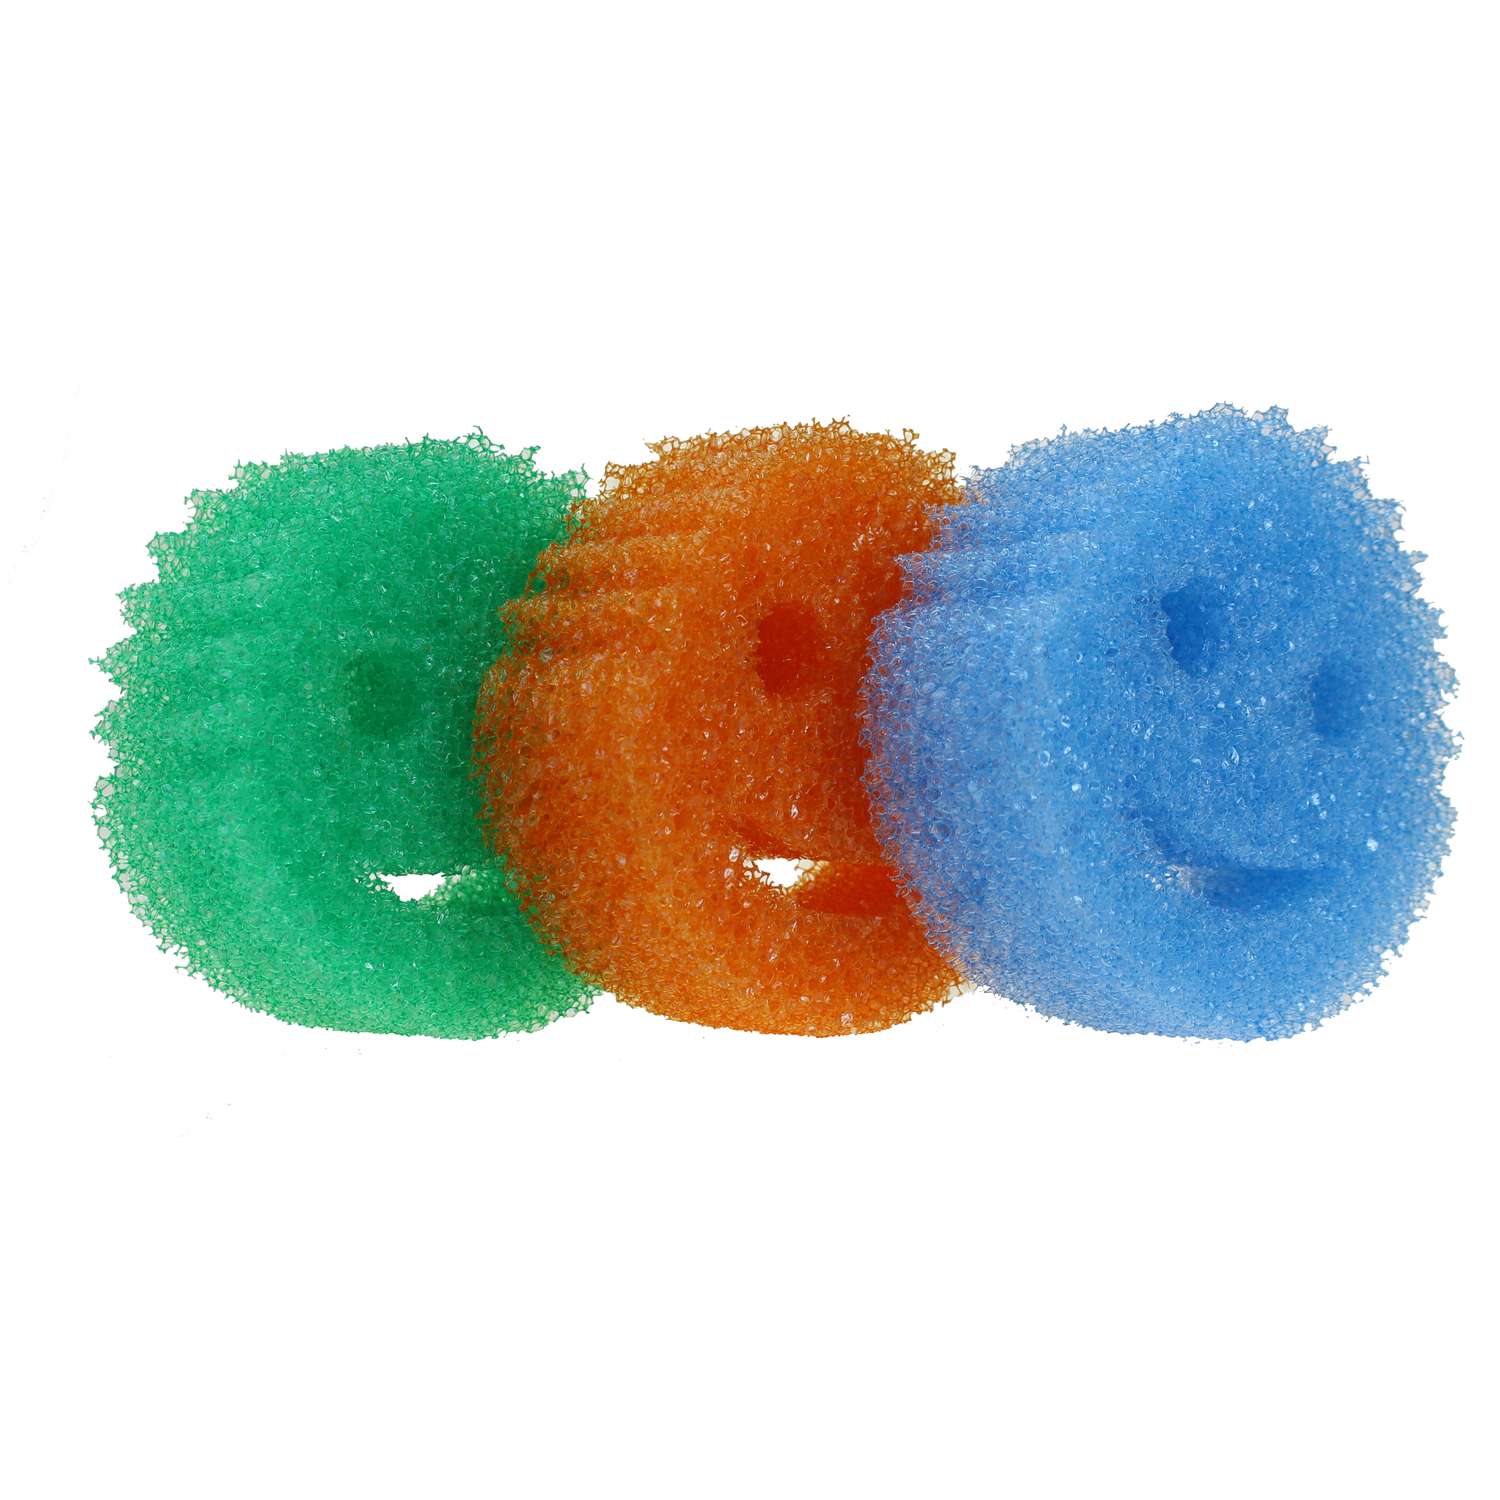 Scrub Daddy Sdc2016i Colors Scratch Free Sponge, Assorted Colors